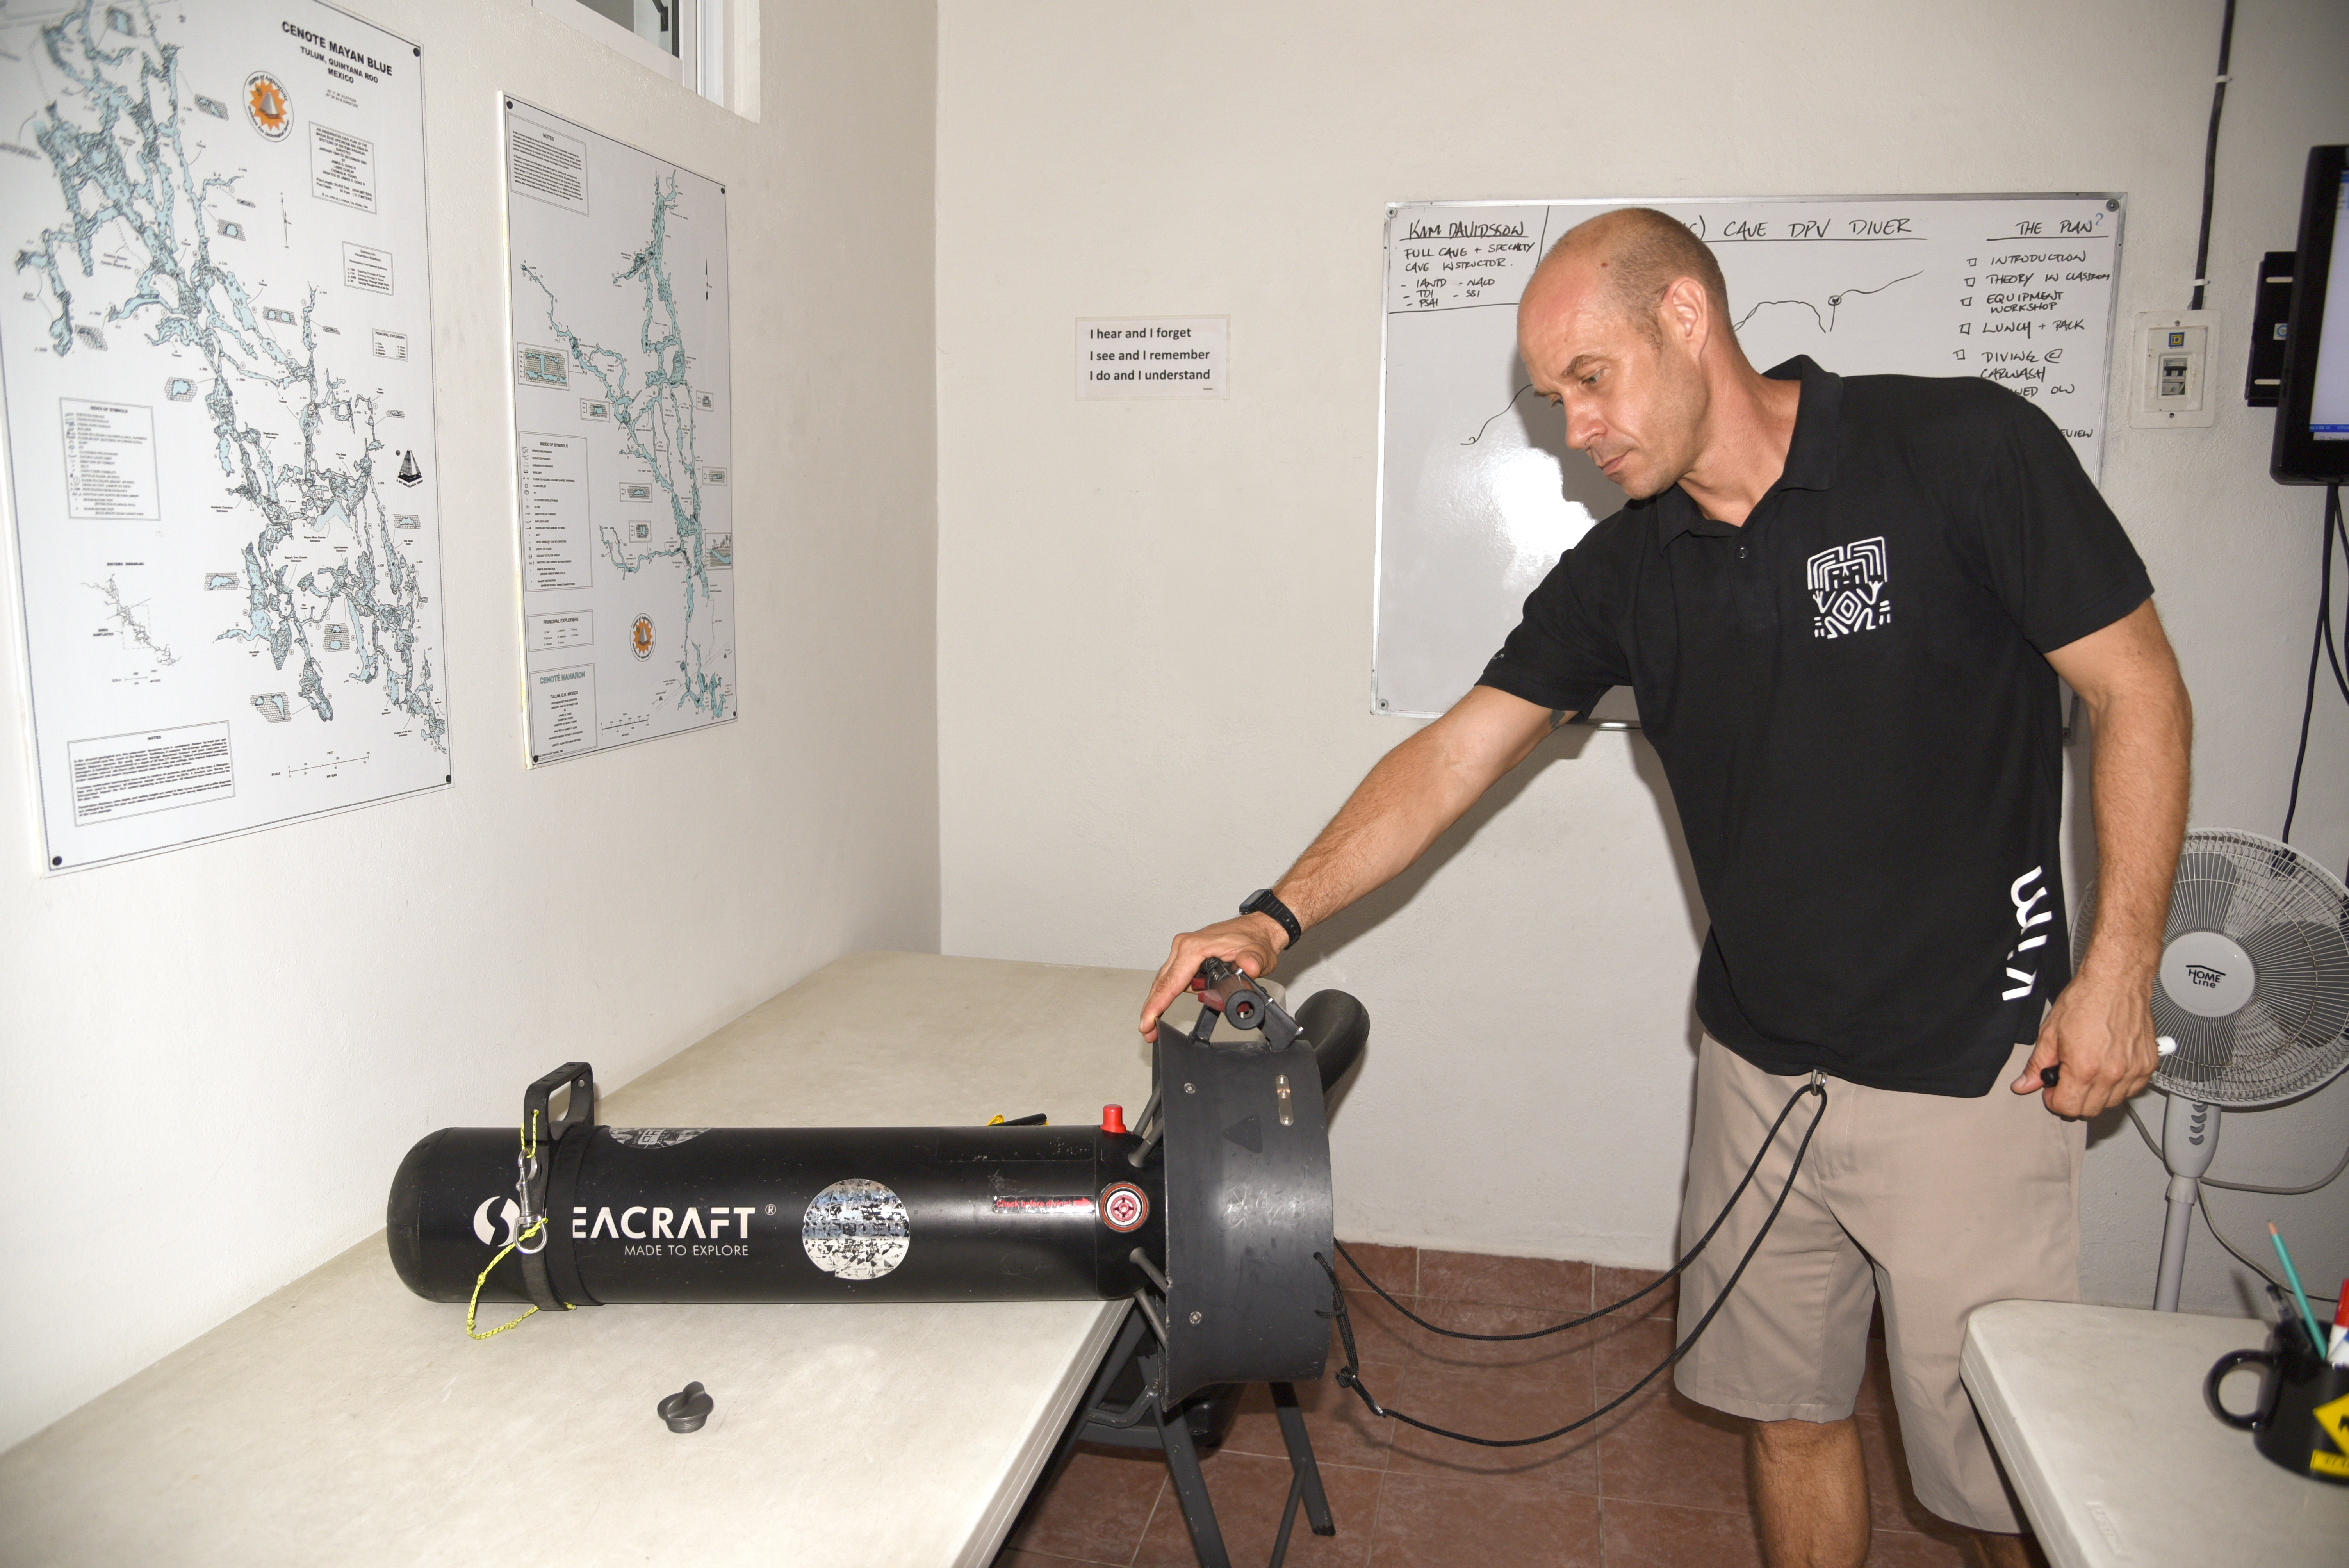 Instructor introducing the Seacraft DPV. Photo by Pierre Constant